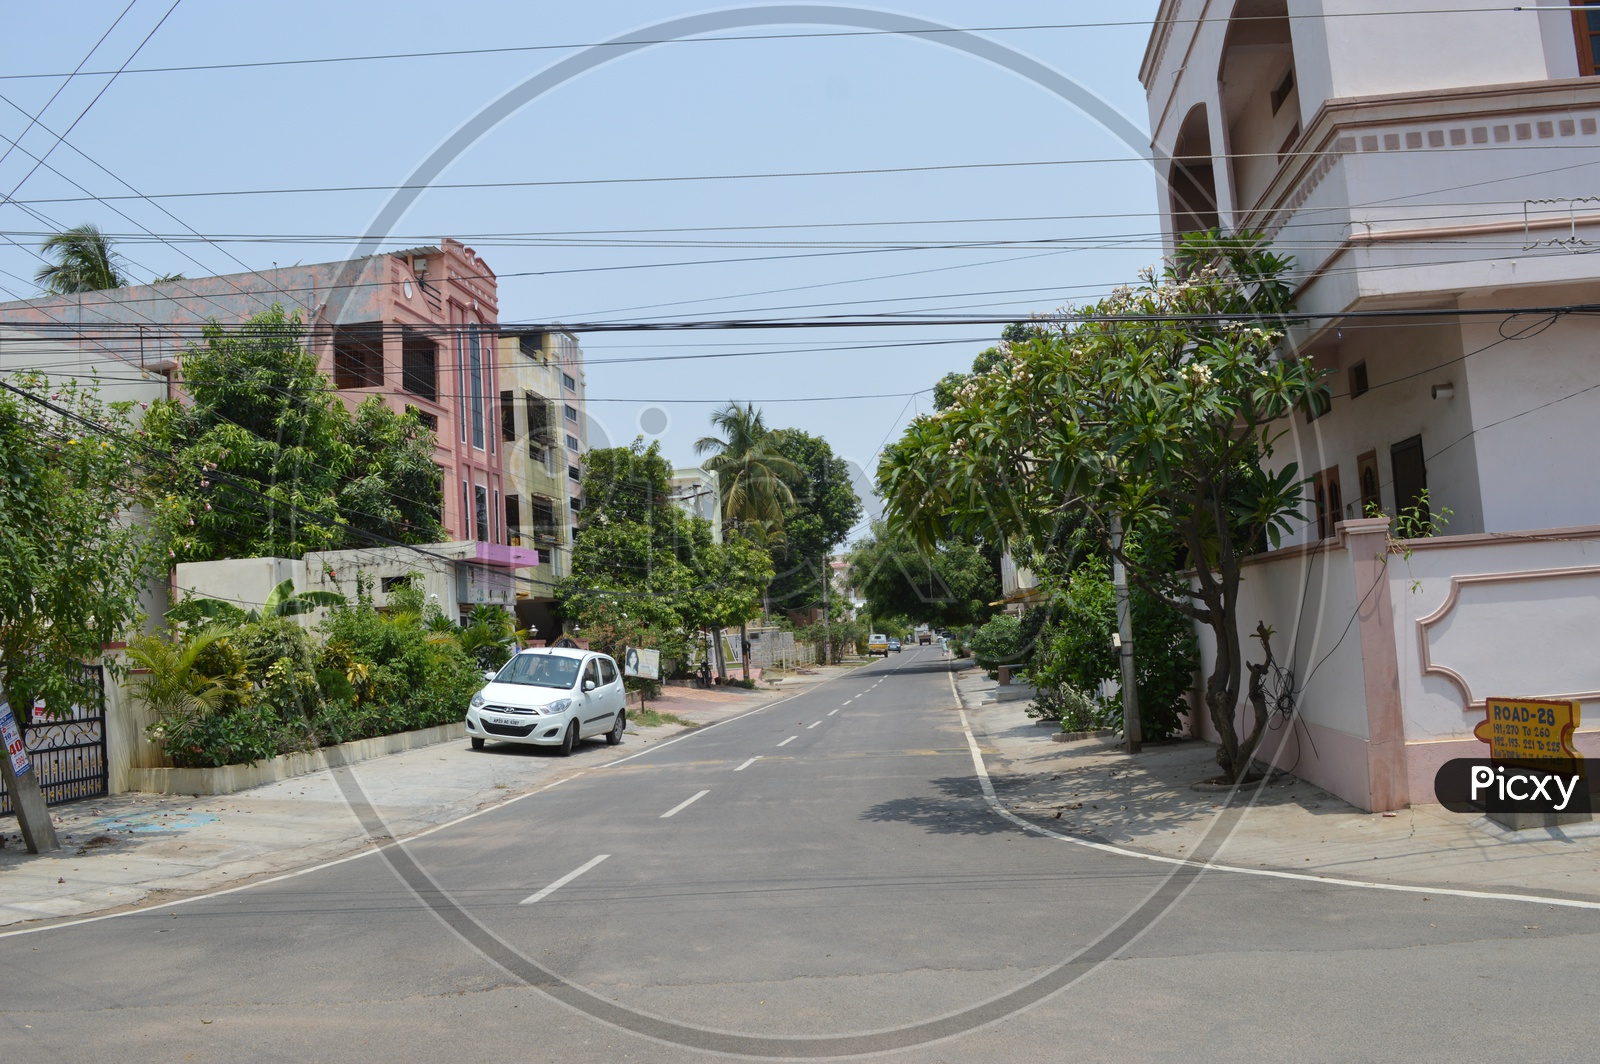 A View Of Roads Or Streets In an Residential Area